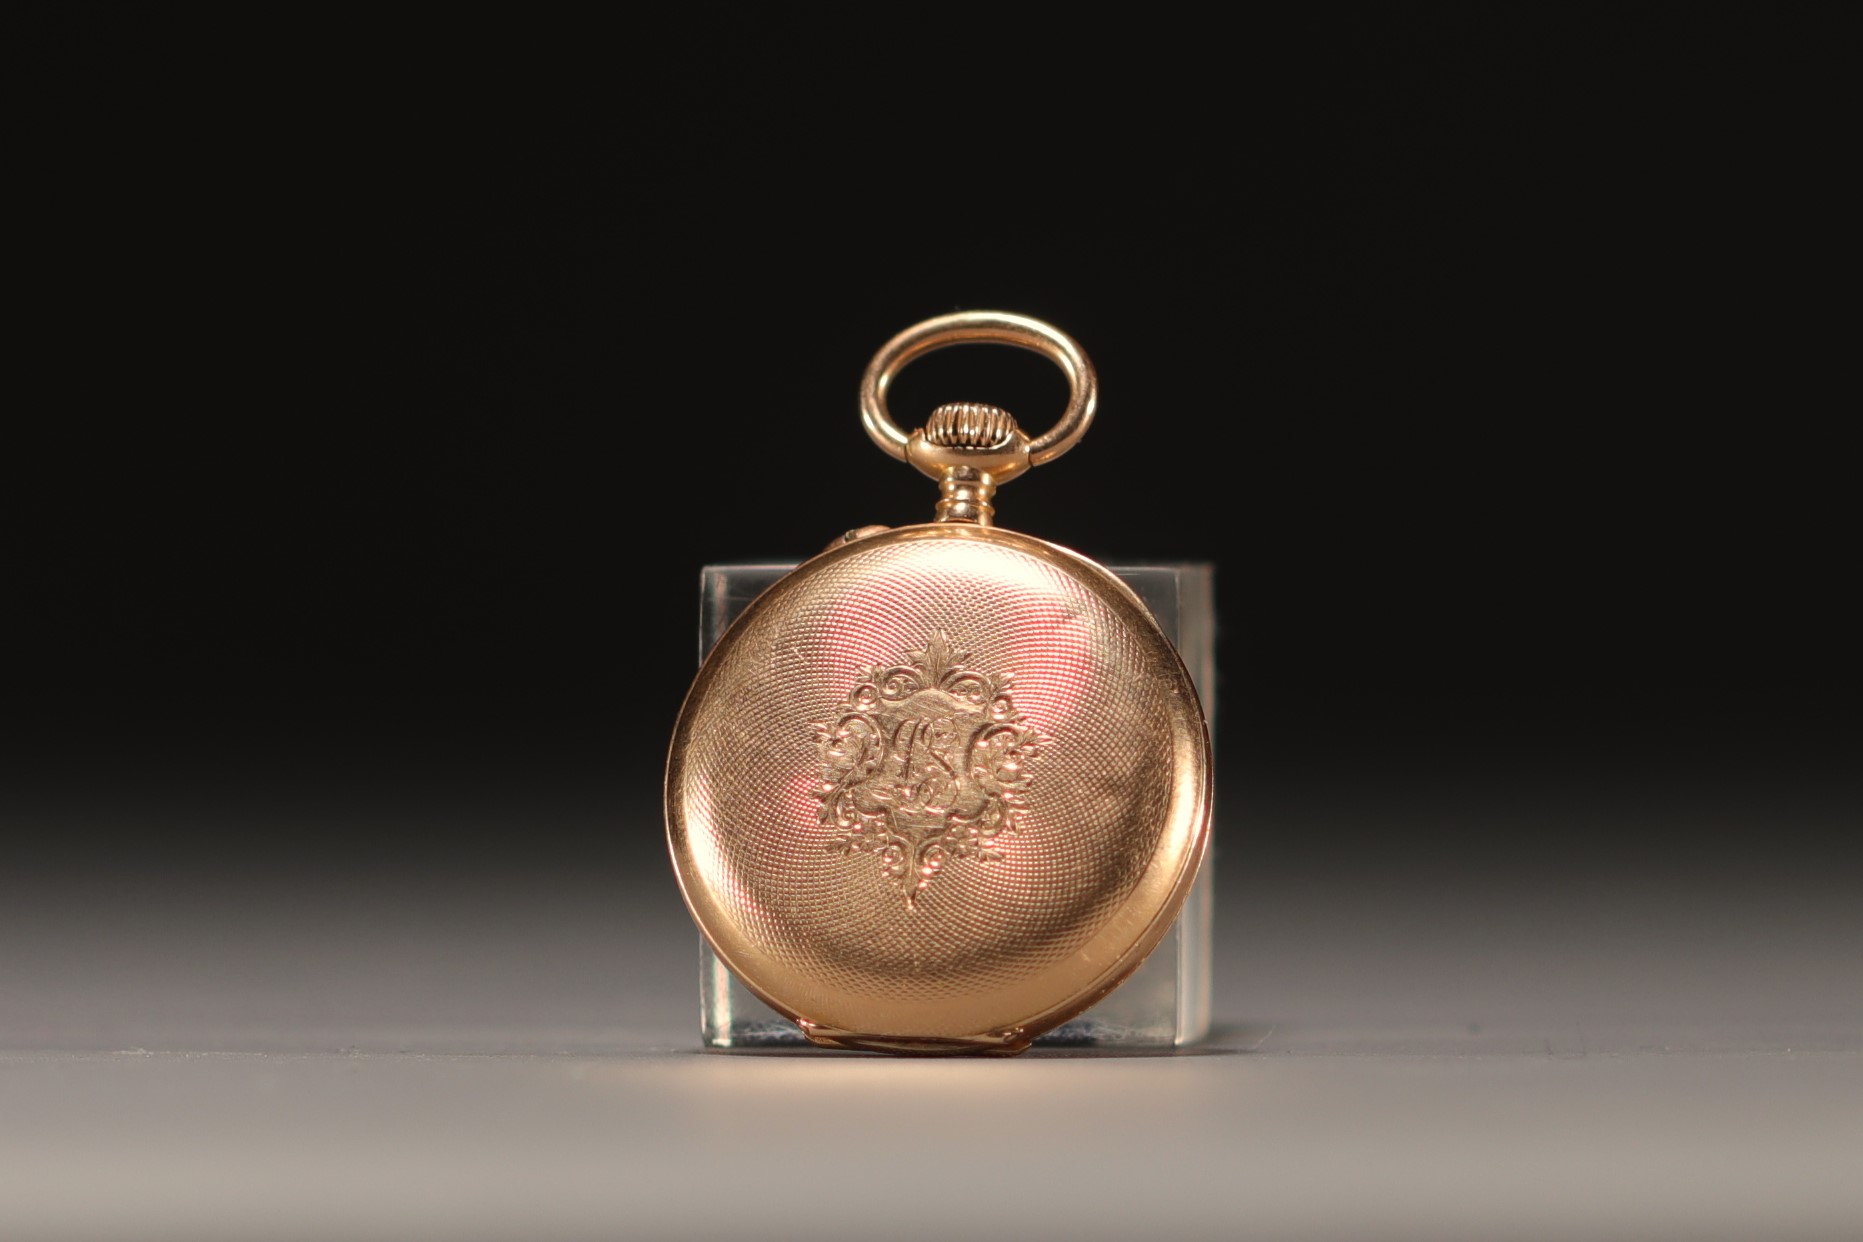 Small 18k gold pocket watch with gold dust cover, gross weight 26.6gr. - Image 3 of 3